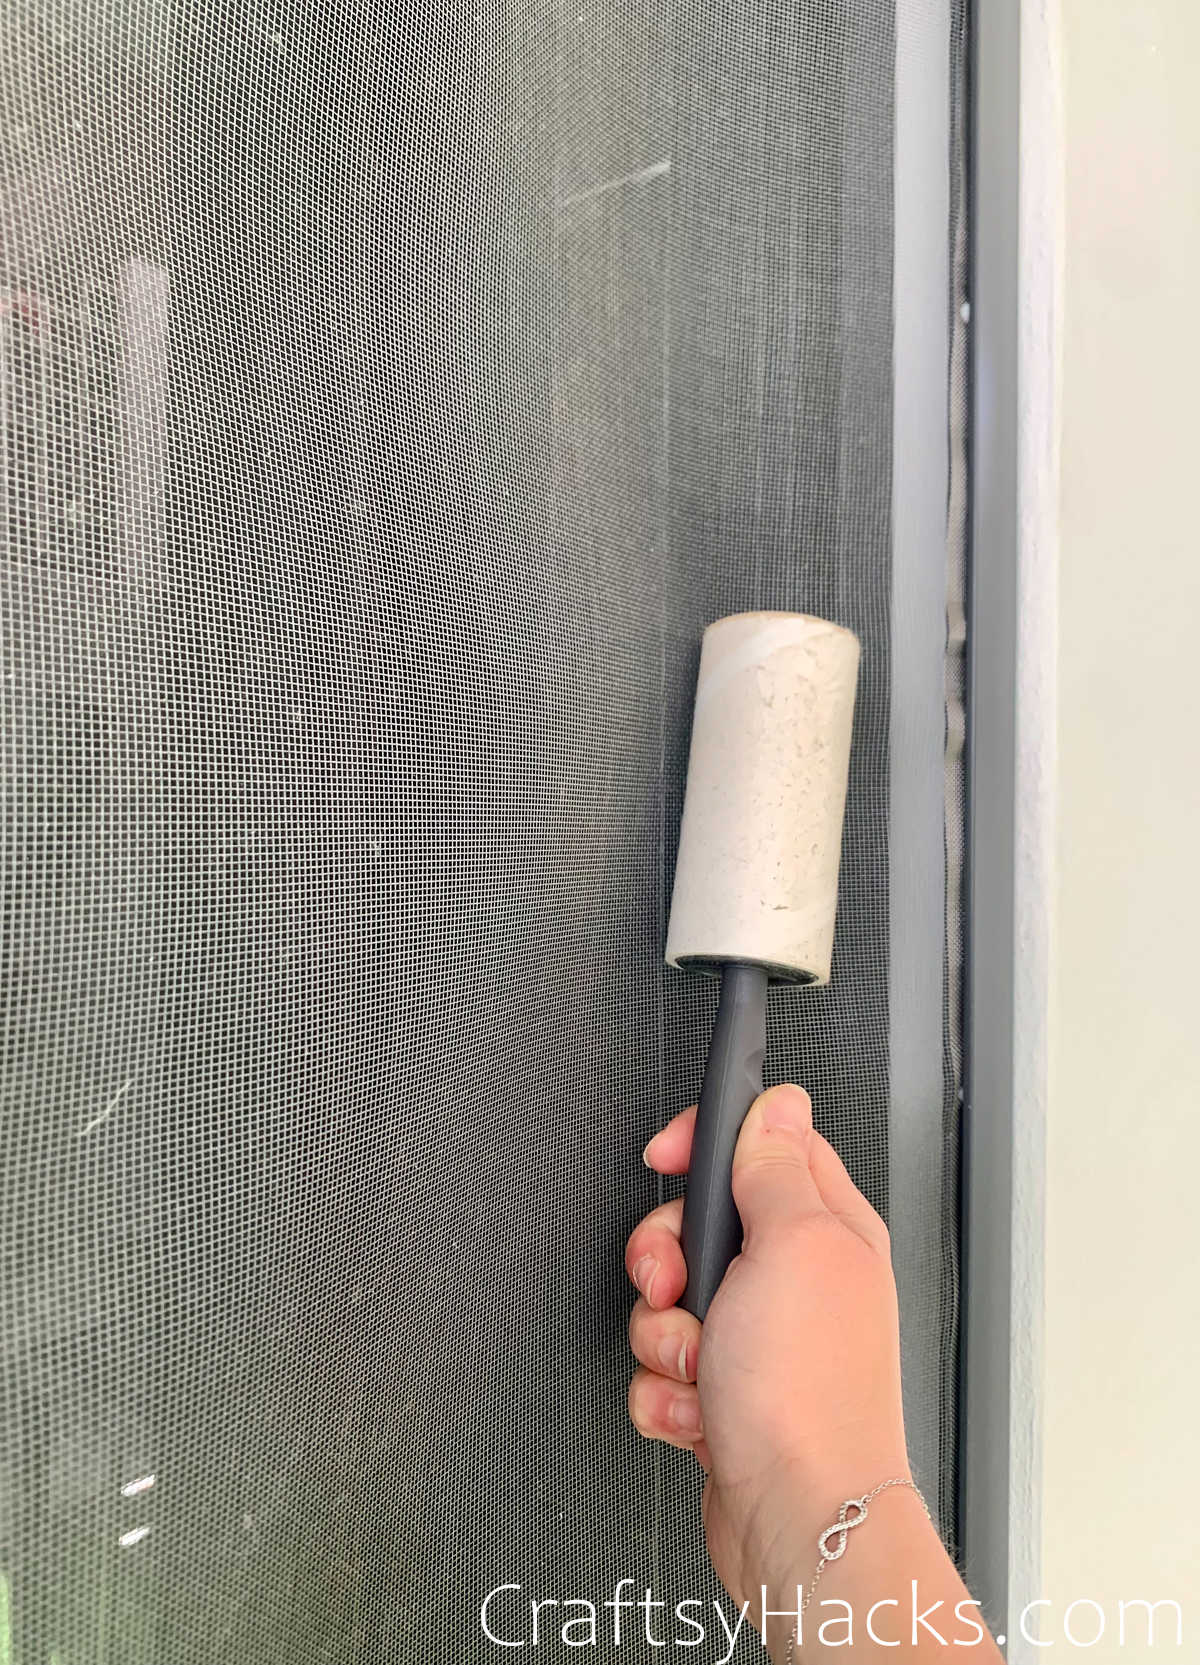 Clean Windows Screens with a Lint Roller